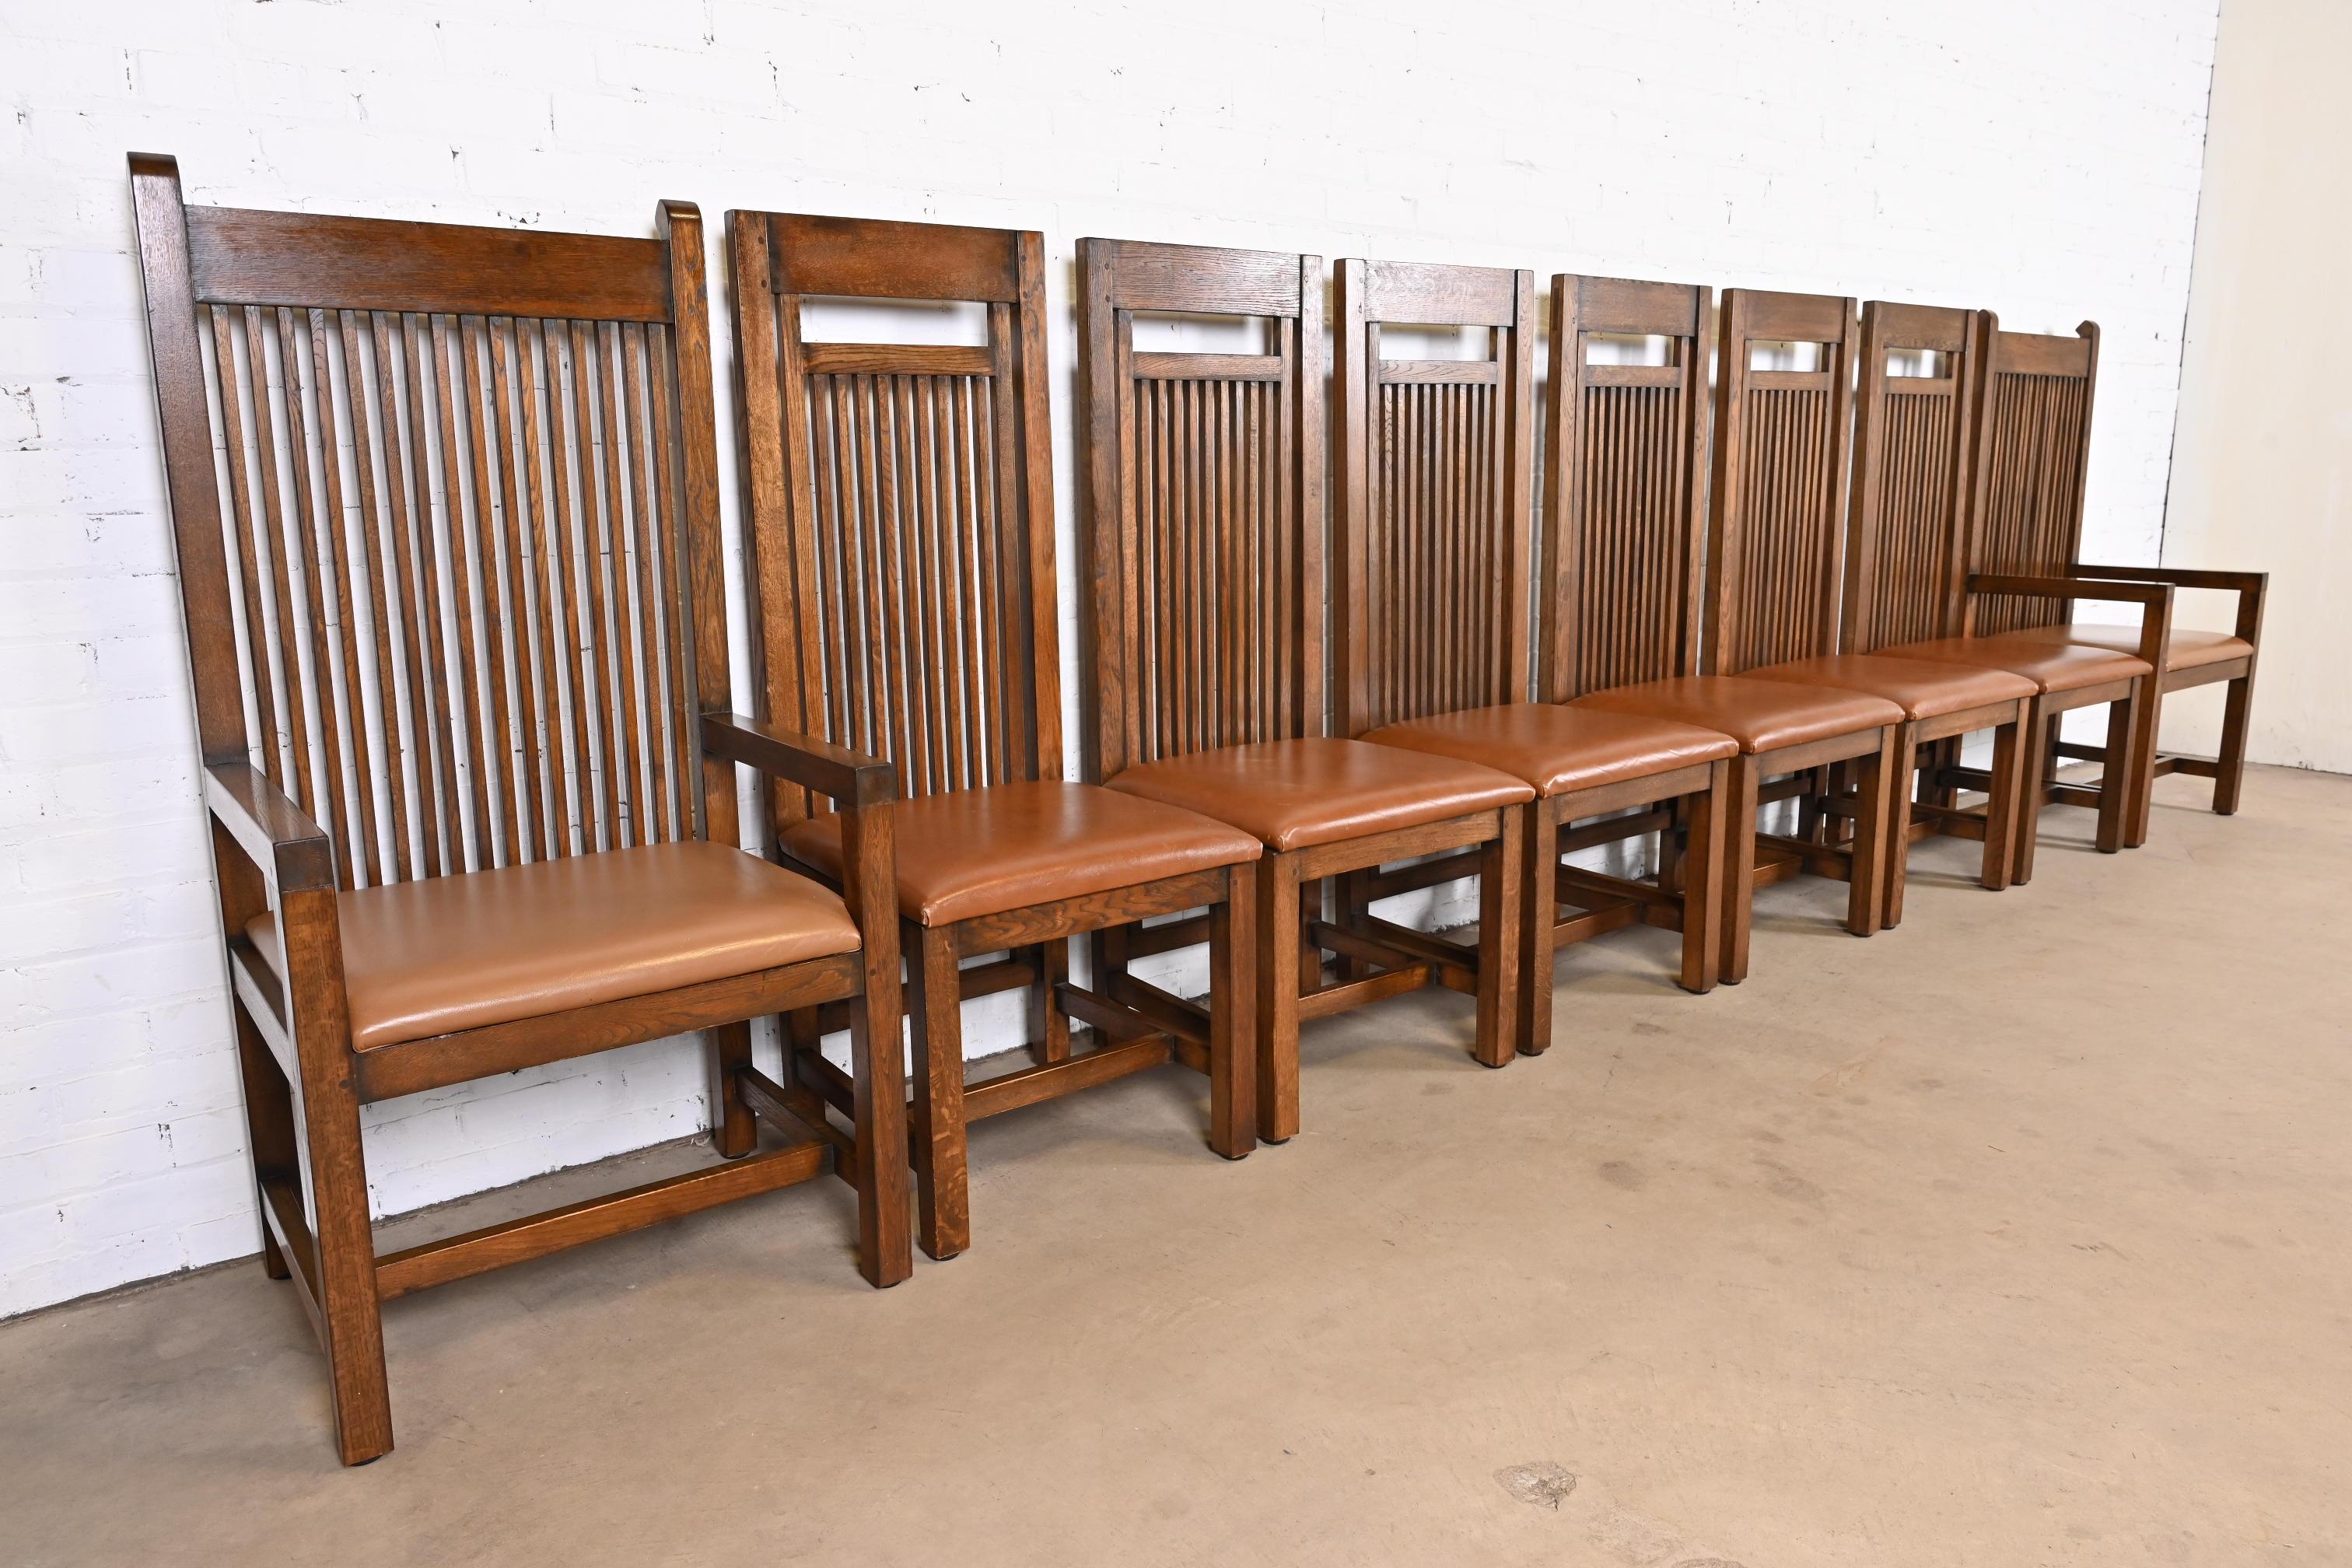 American Frank Lloyd Wright Arts & Crafts Oak and Leather High Back Dining Chairs